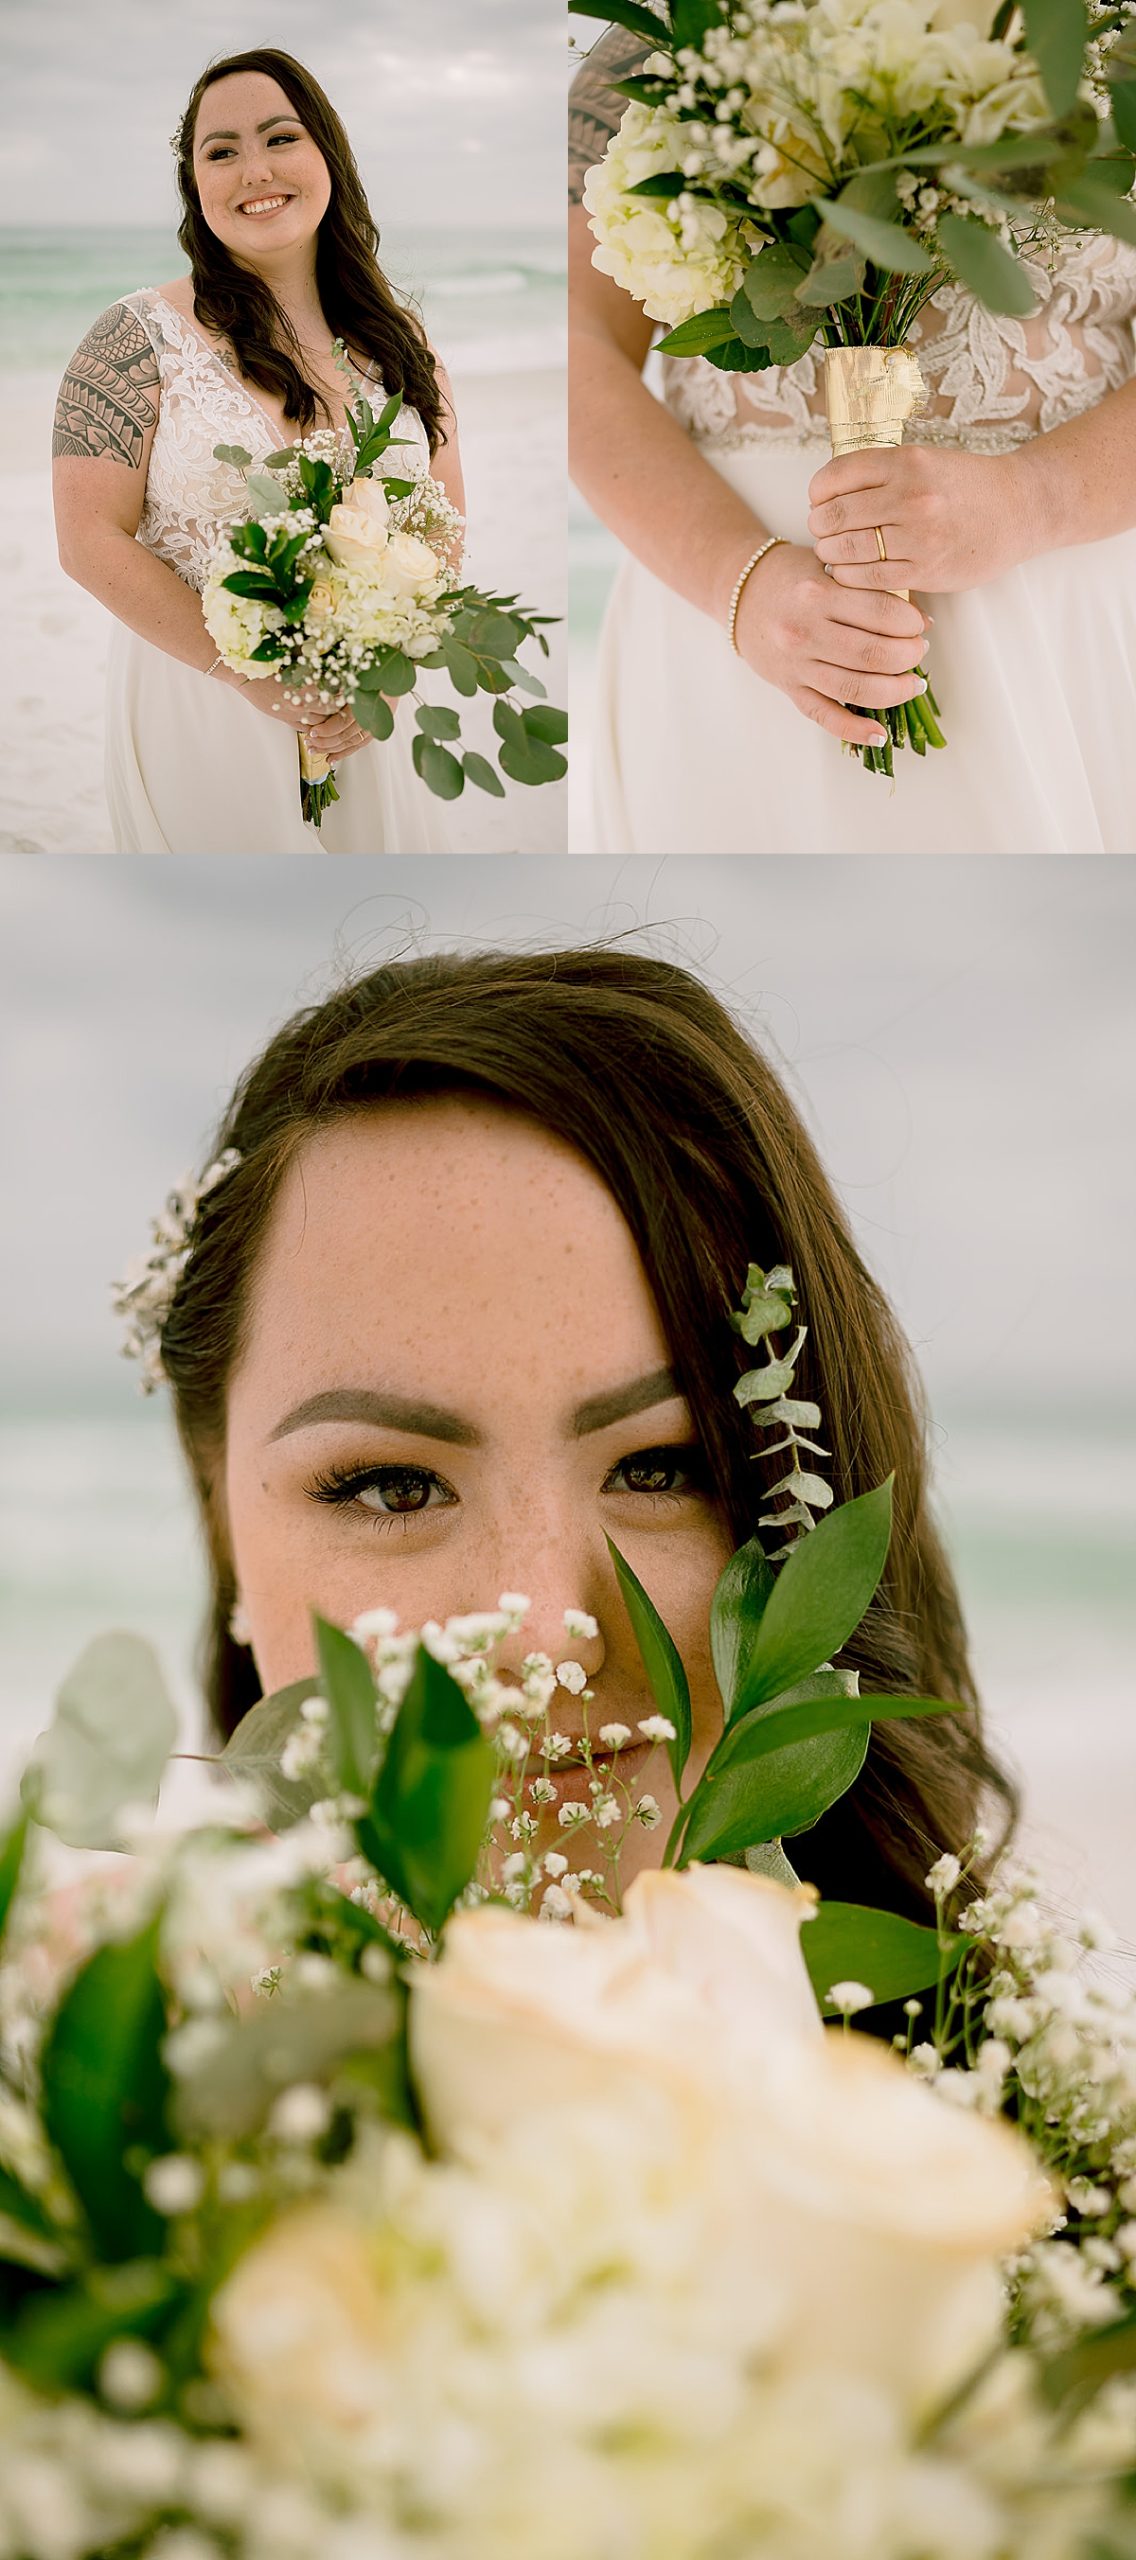 woman holding greenery wedding florals by Emily burns photo